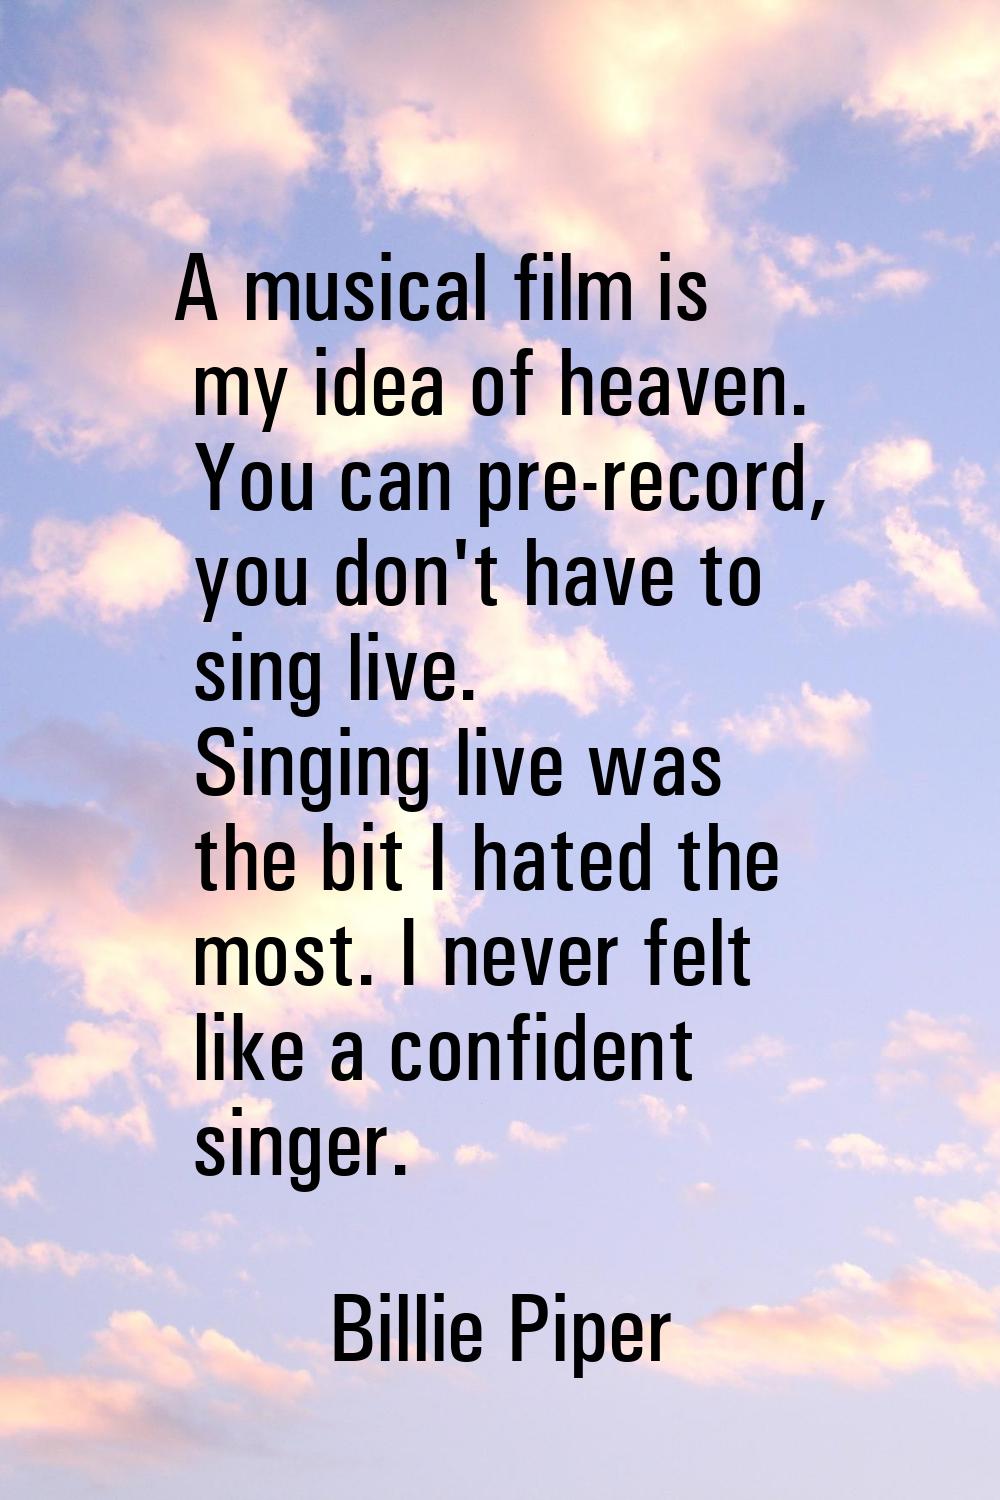 A musical film is my idea of heaven. You can pre-record, you don't have to sing live. Singing live 